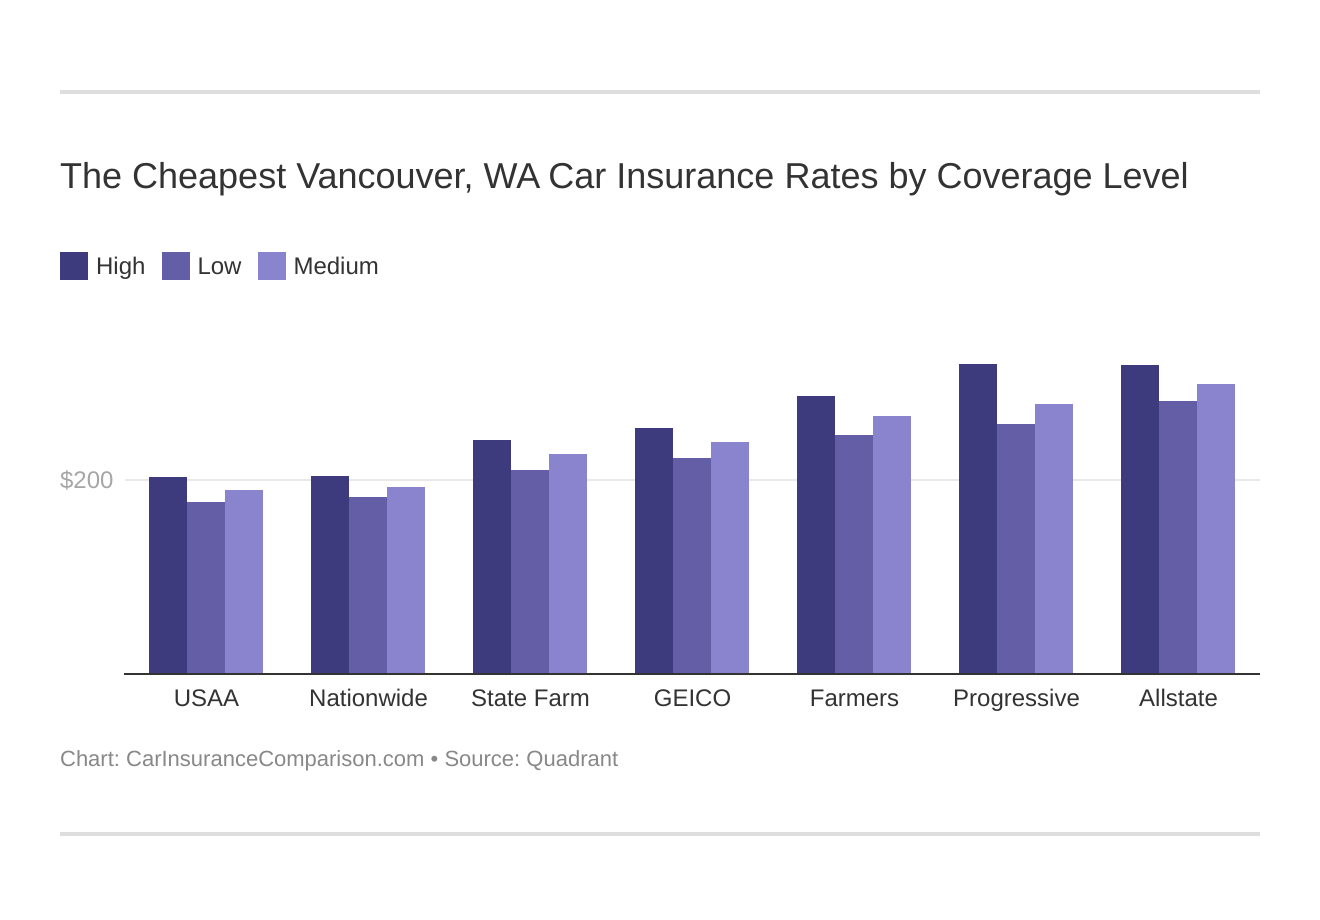 The Cheapest Vancouver, WA Car Insurance Rates by Coverage Level